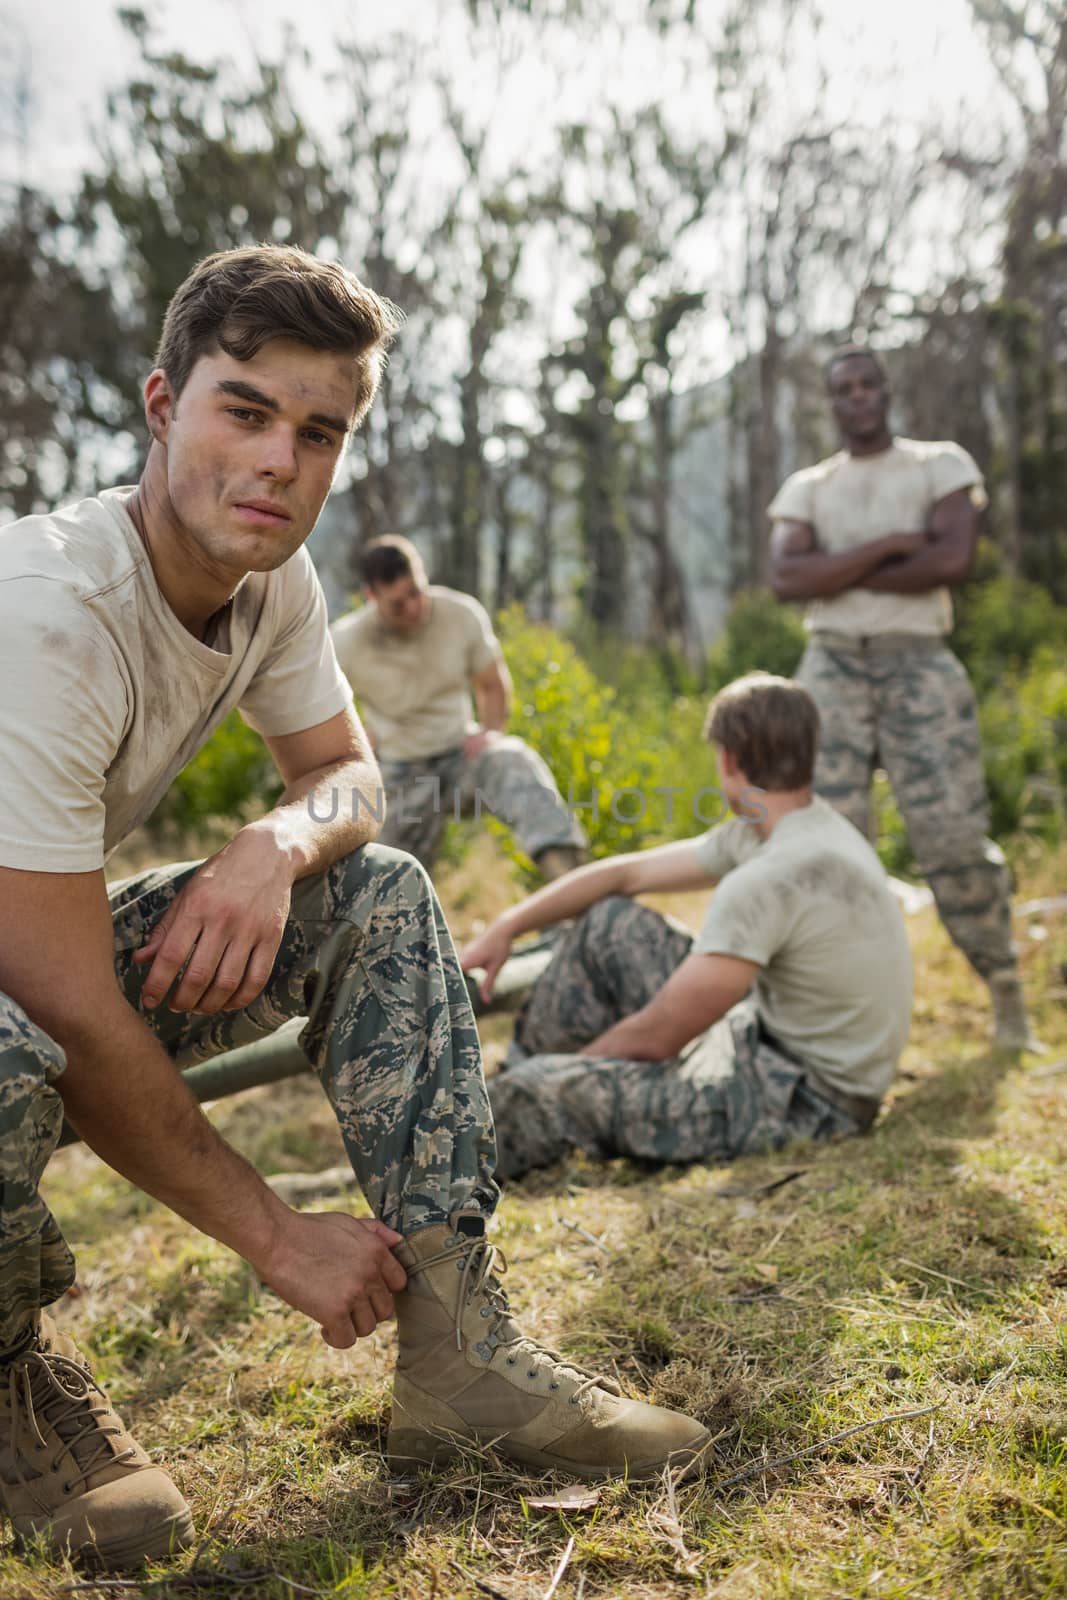 Portrait of Soldier tying his shoe laces in boot camp